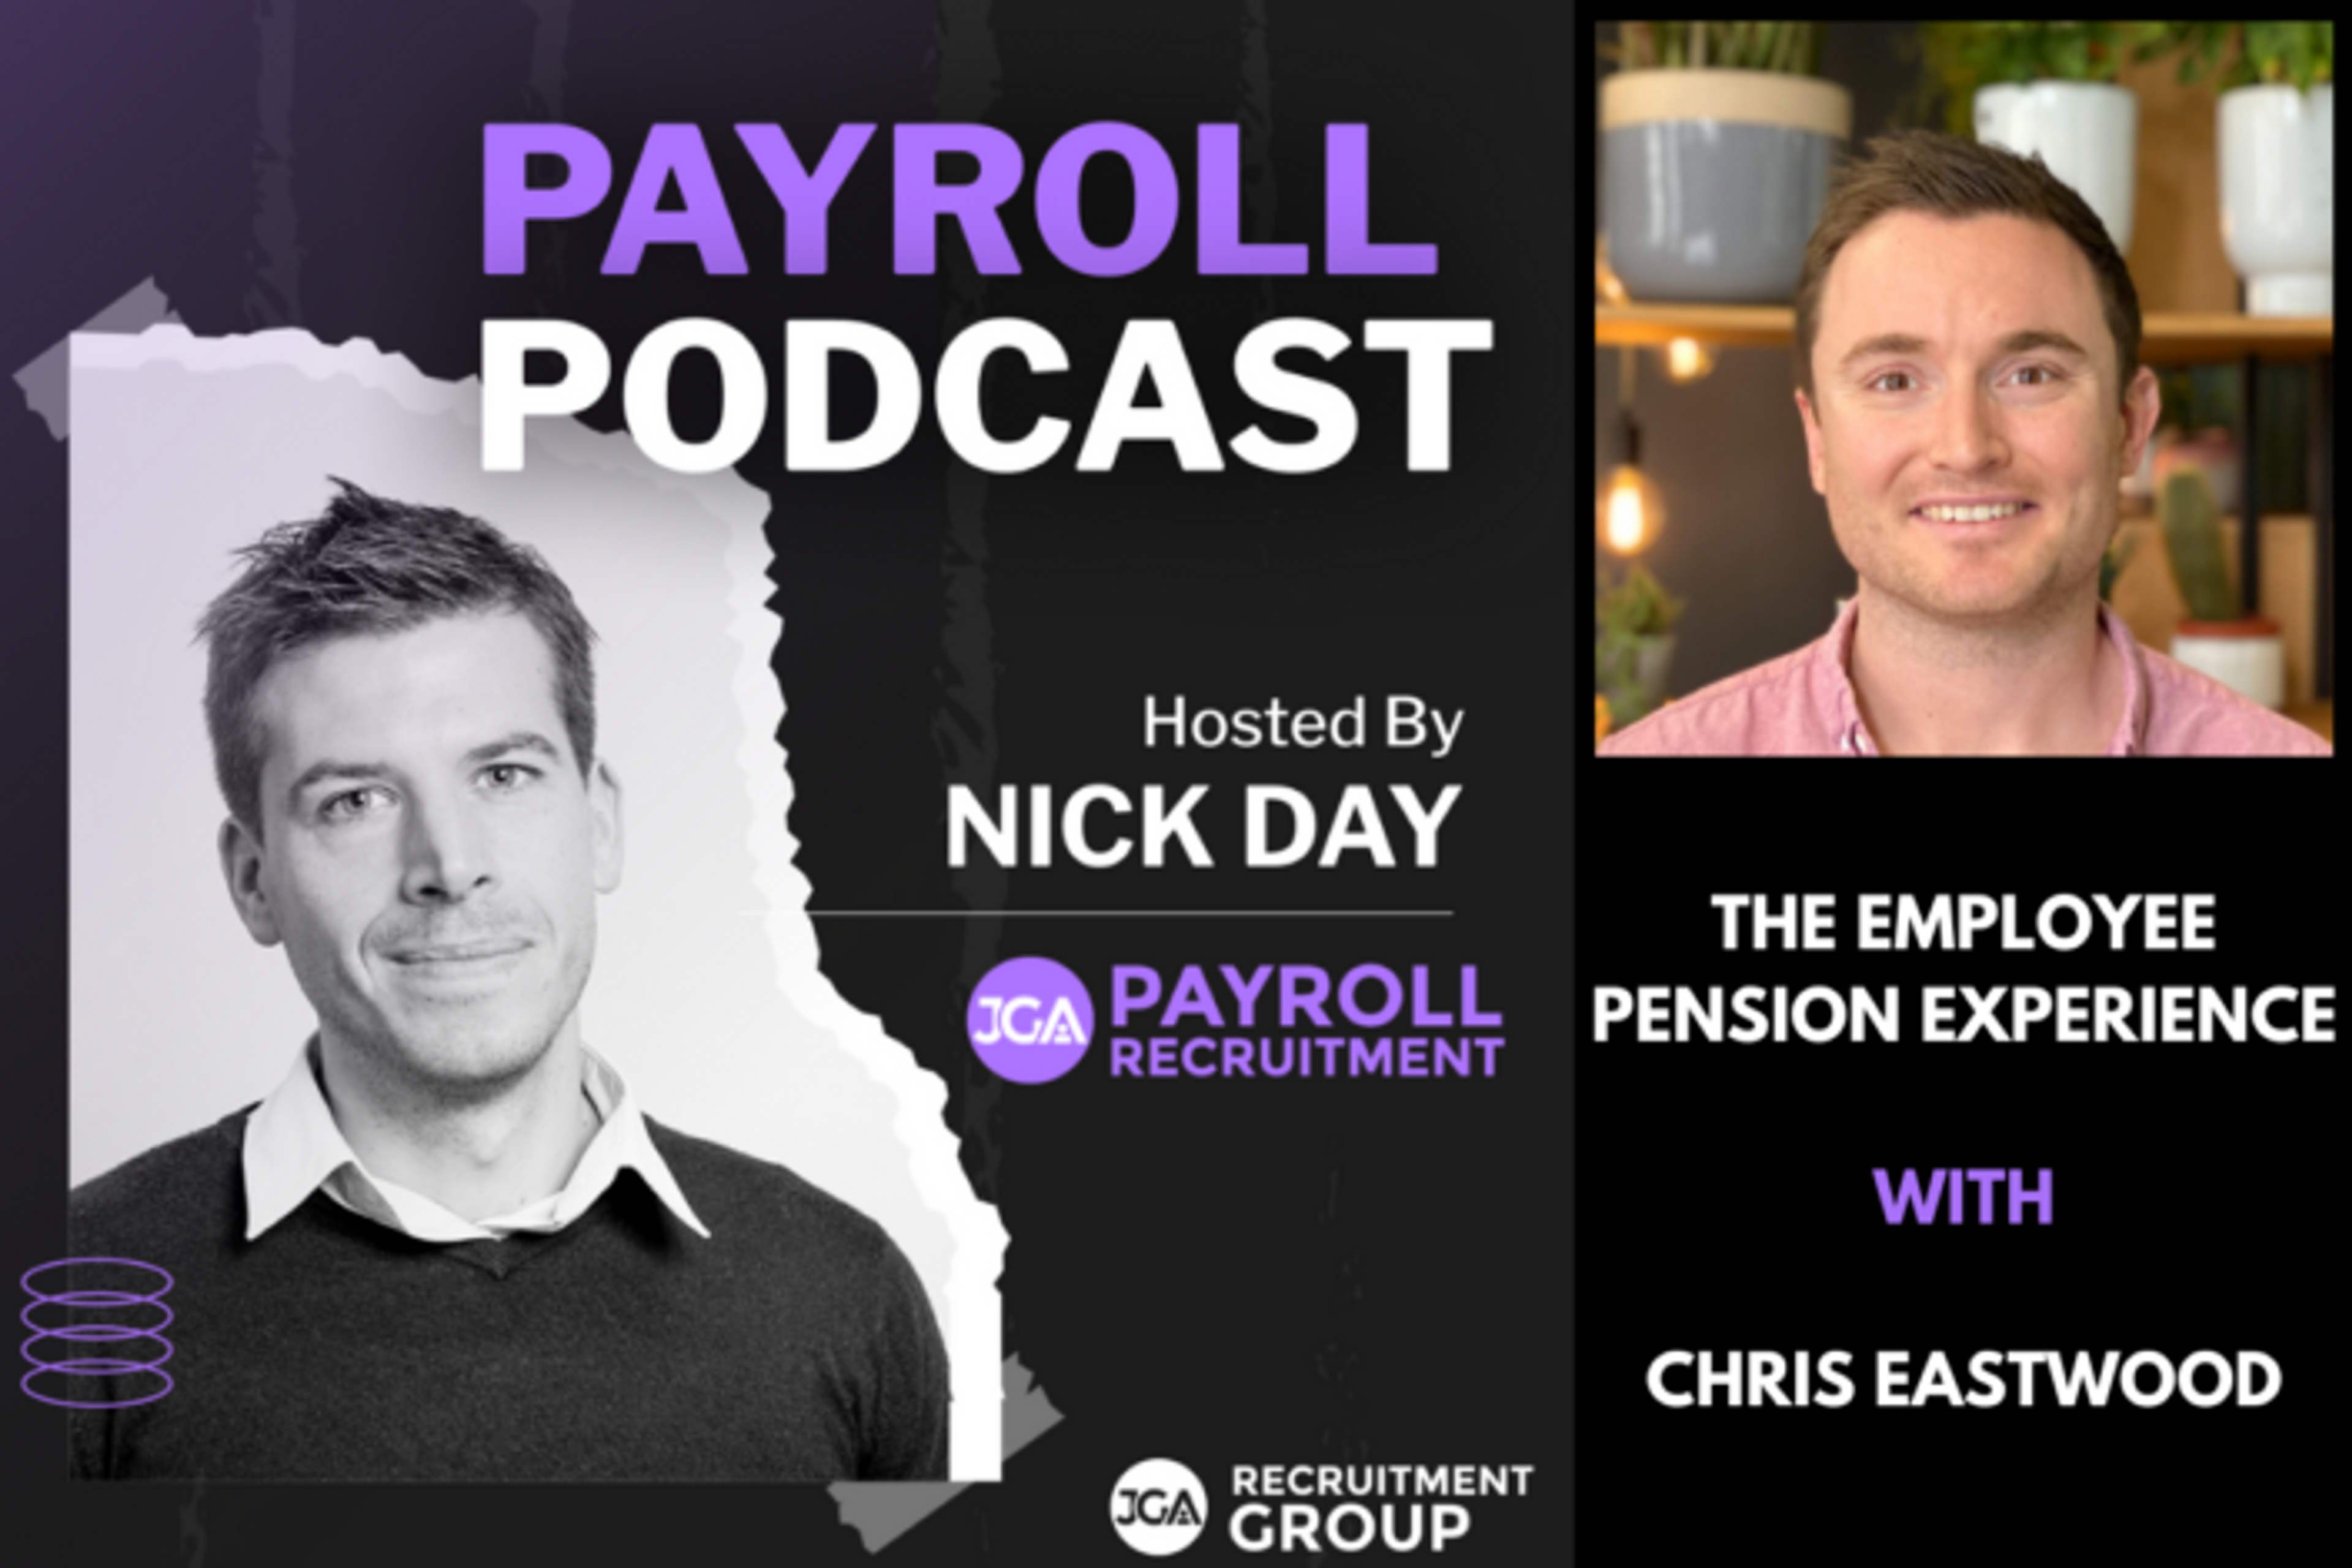 A promotional image for the Payroll Podcast with a photo of host Nick Day and interviewee Chris Eastwood